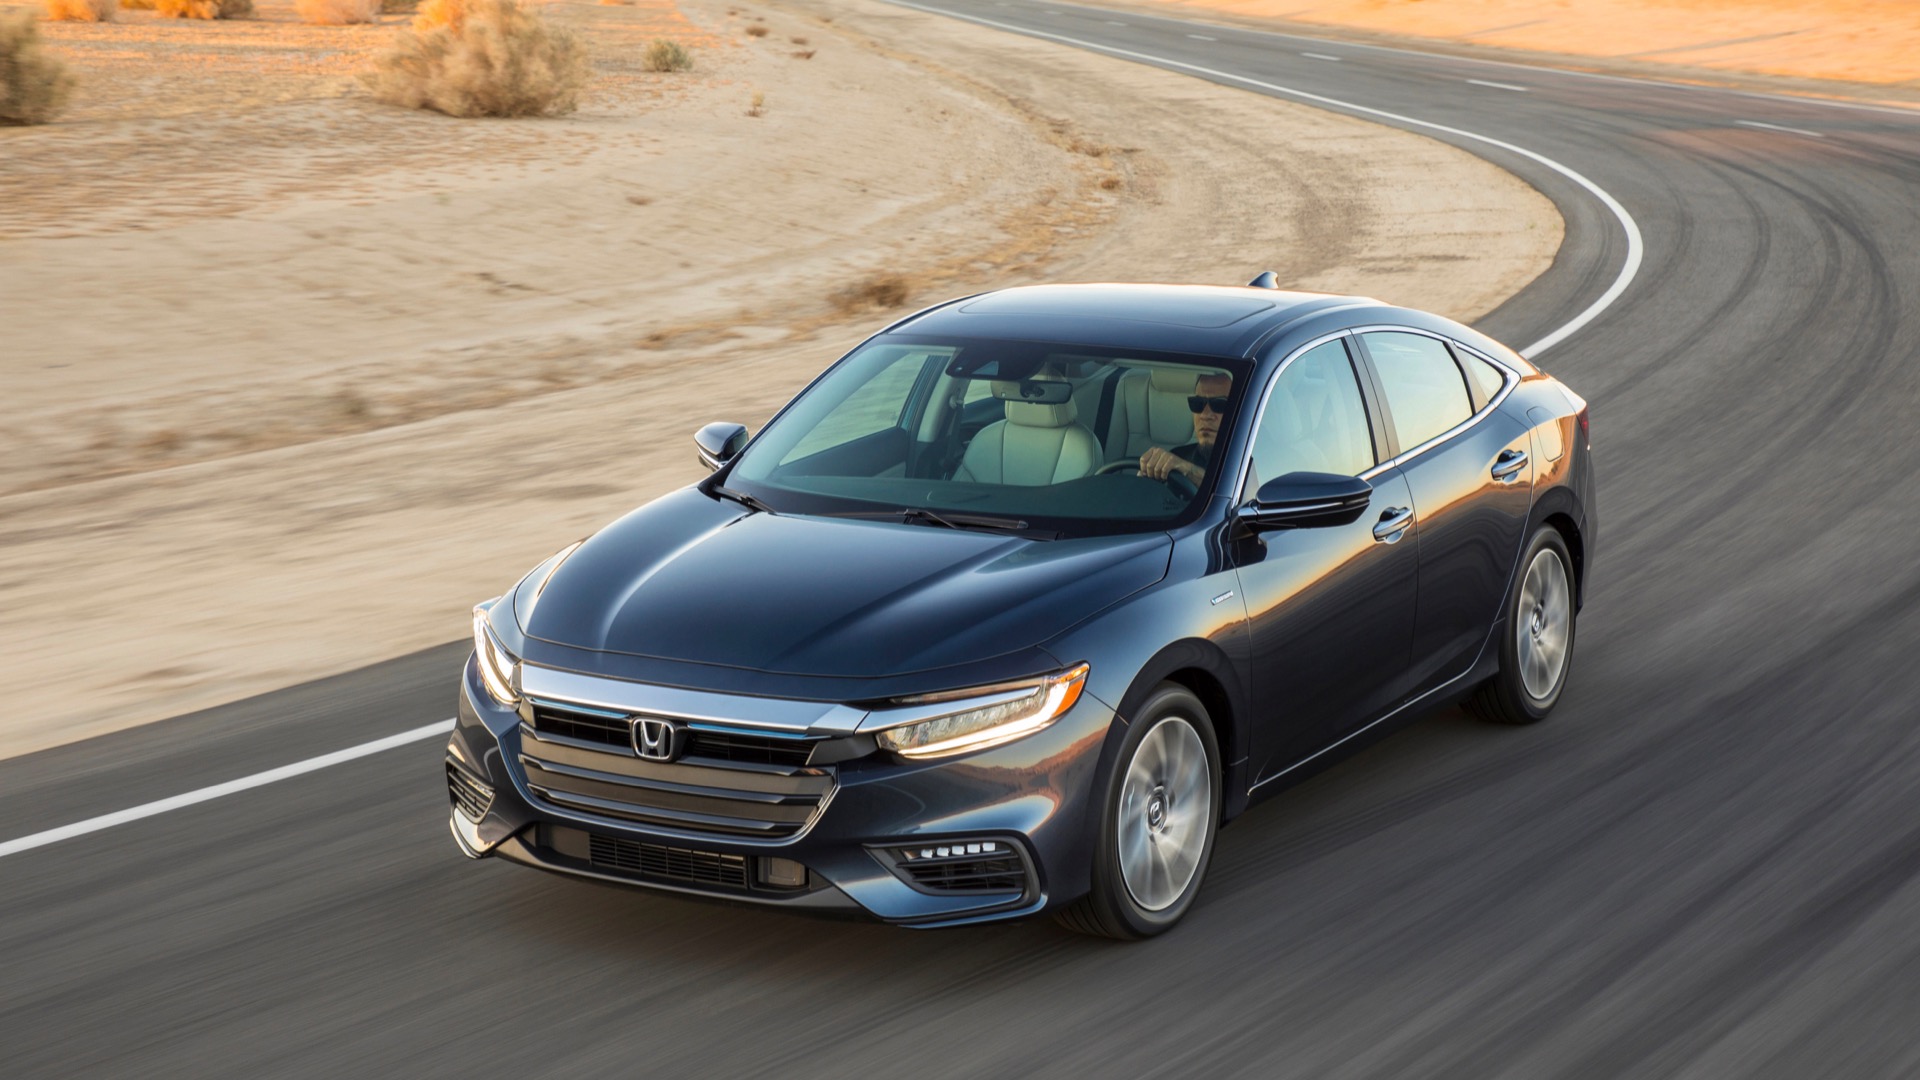 2022 Honda Insight Review: Prices, Specs, and Photos - The Car Connection